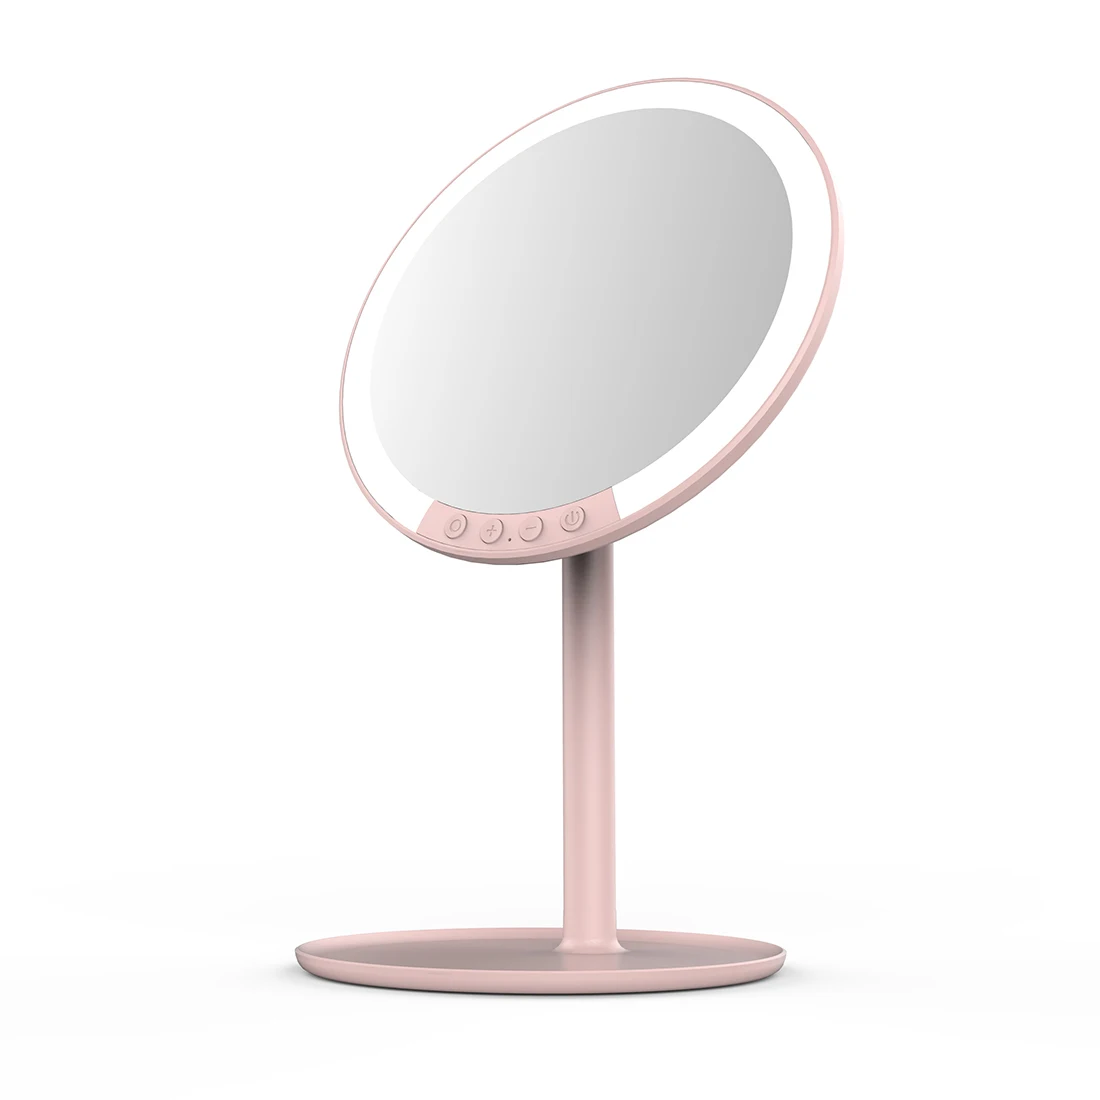 

3 Color Lighting LED Makeup Pink Mirror Desktop 7X Magnification Vanity Table Mirror with LED Light, Pink,white